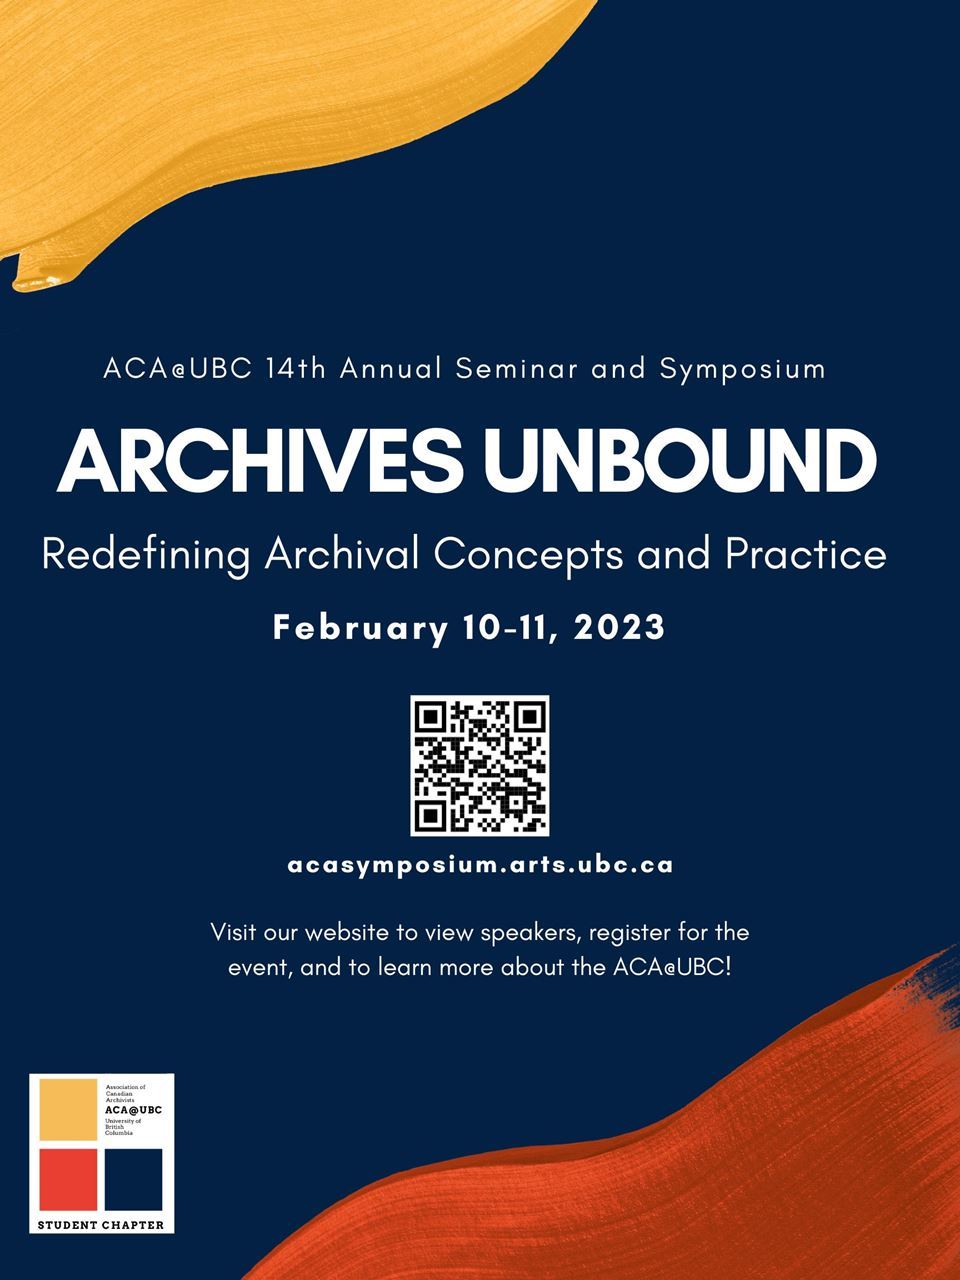 ACA@UBC 14th Annual Seminar and Symposium Archives Unbound Redefining Archival Concepts and Practice February 10-11, 2023 QR Code acasymposium.arts.ubc.ca Visit our website to view speakers, register for the event, and to learn more about the ACA@UBC! 